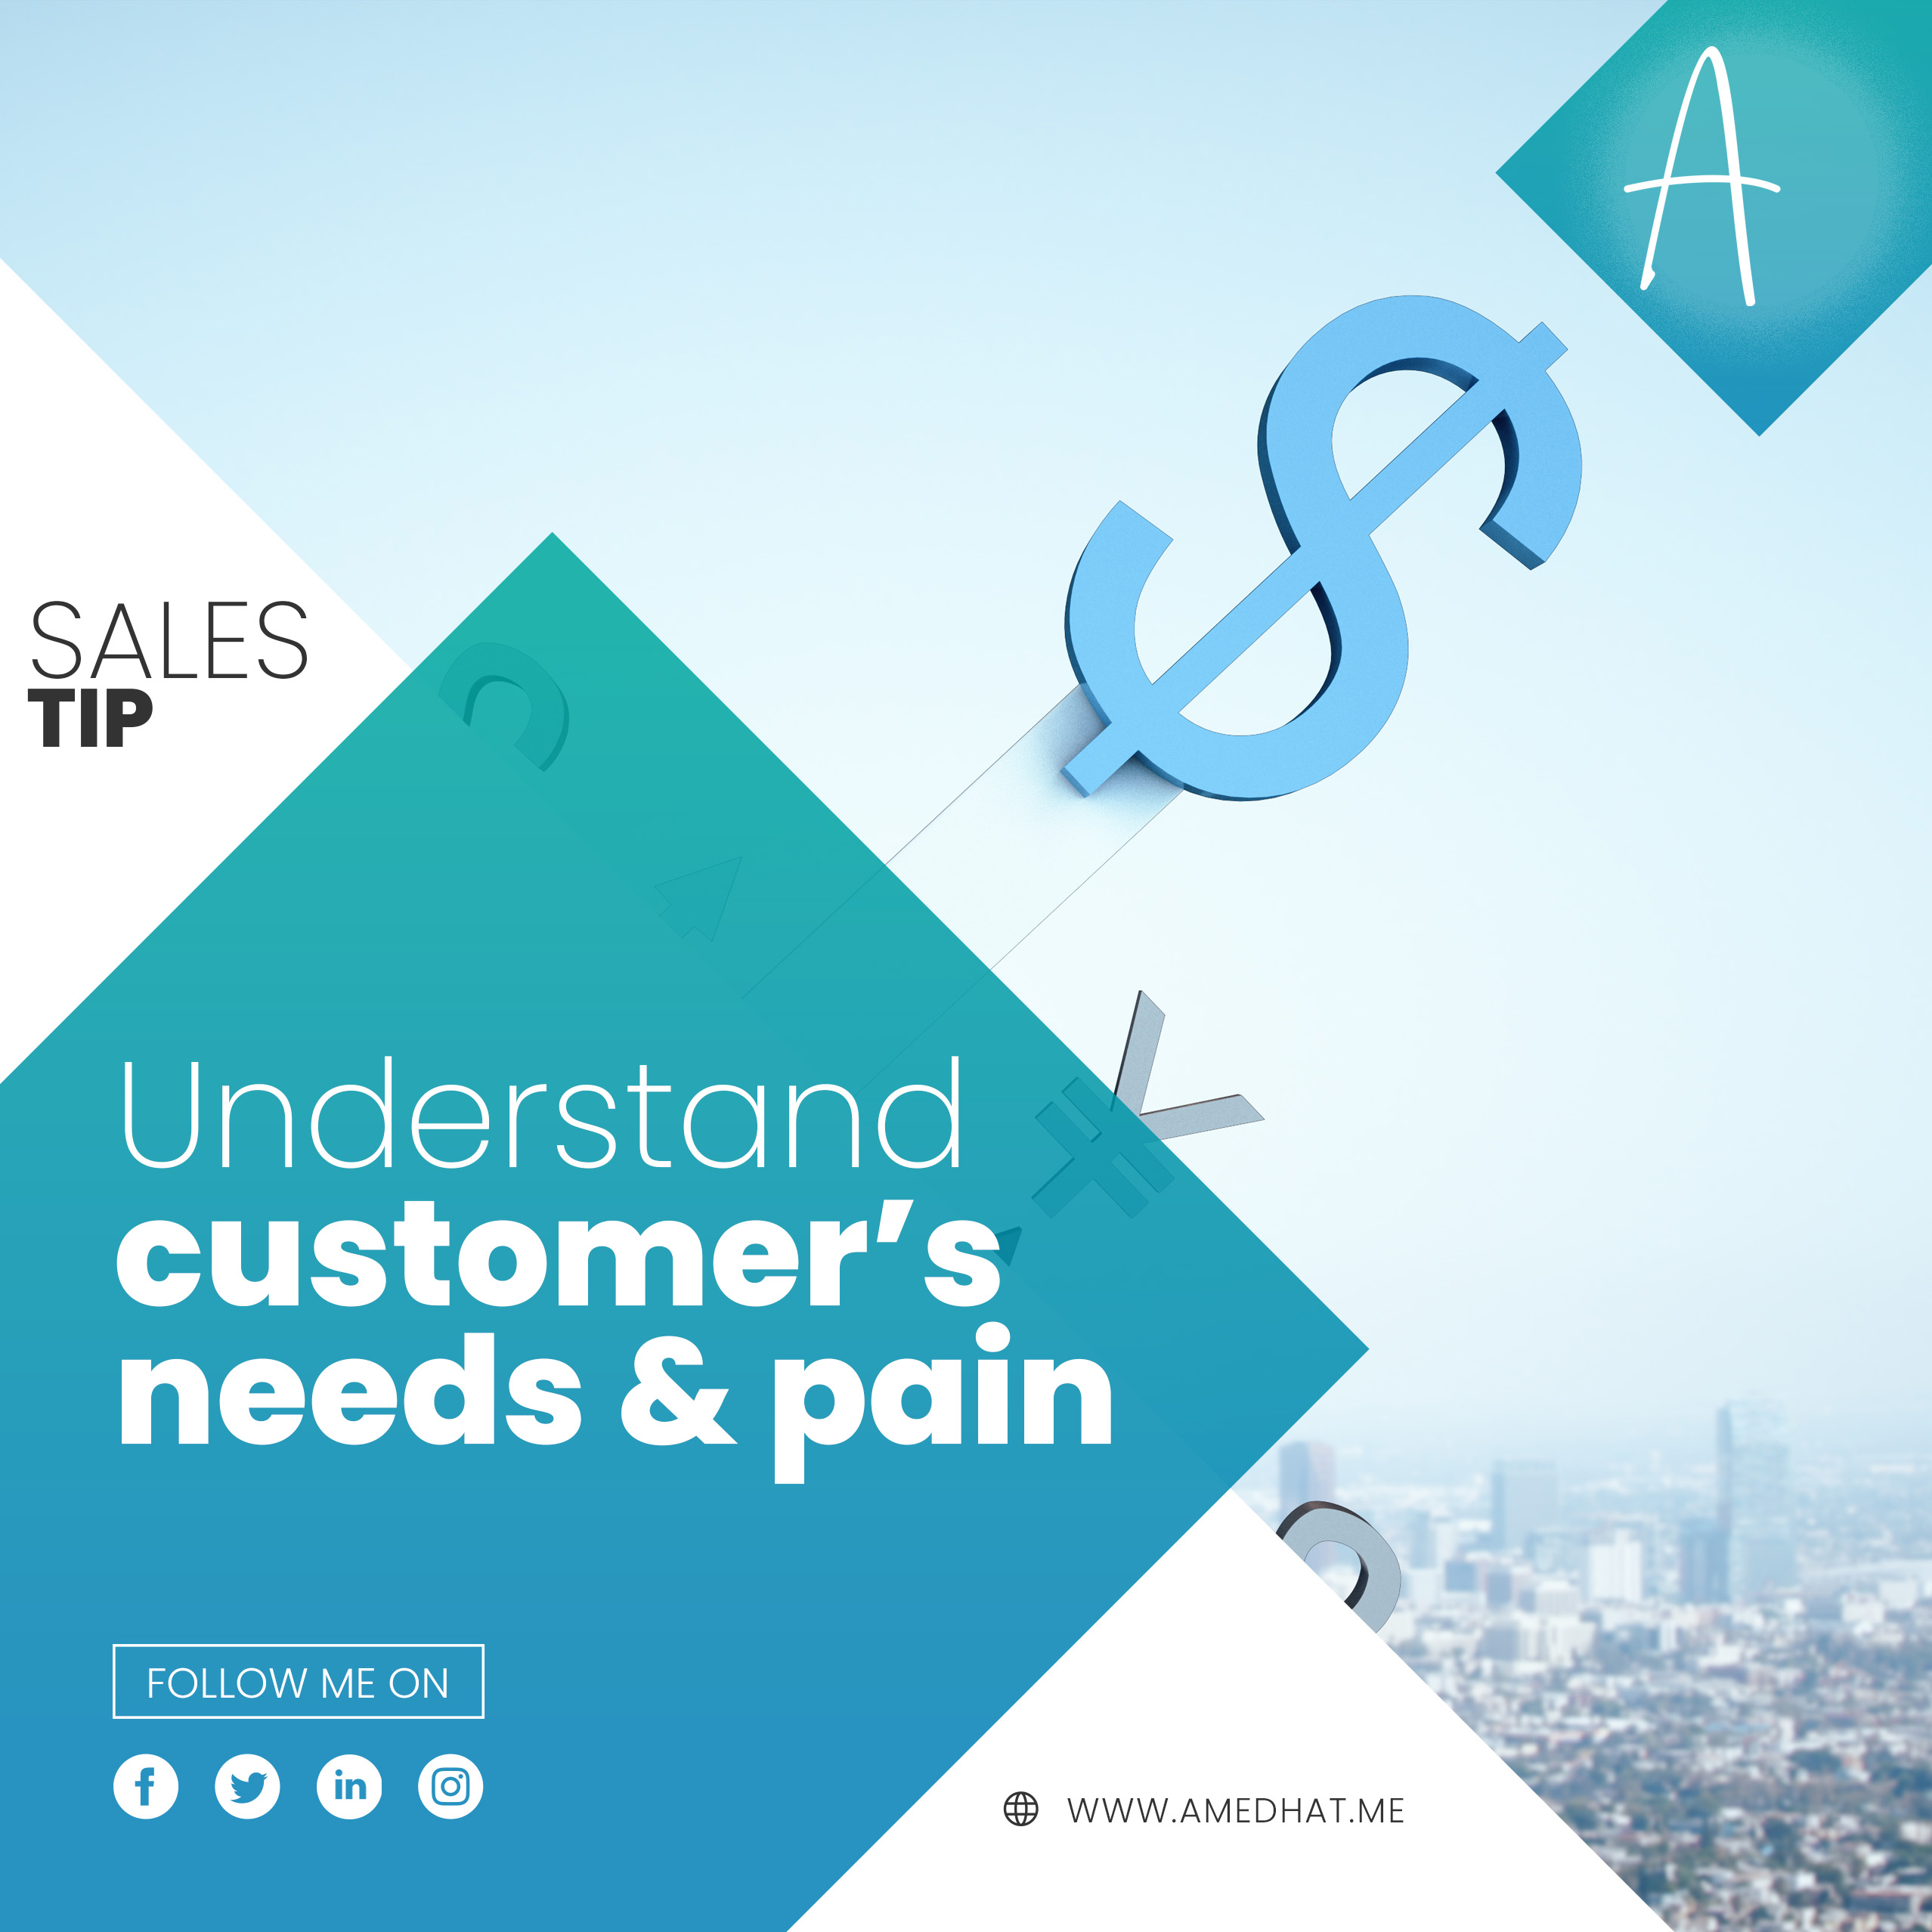 Understand your customer’s needs and pain points